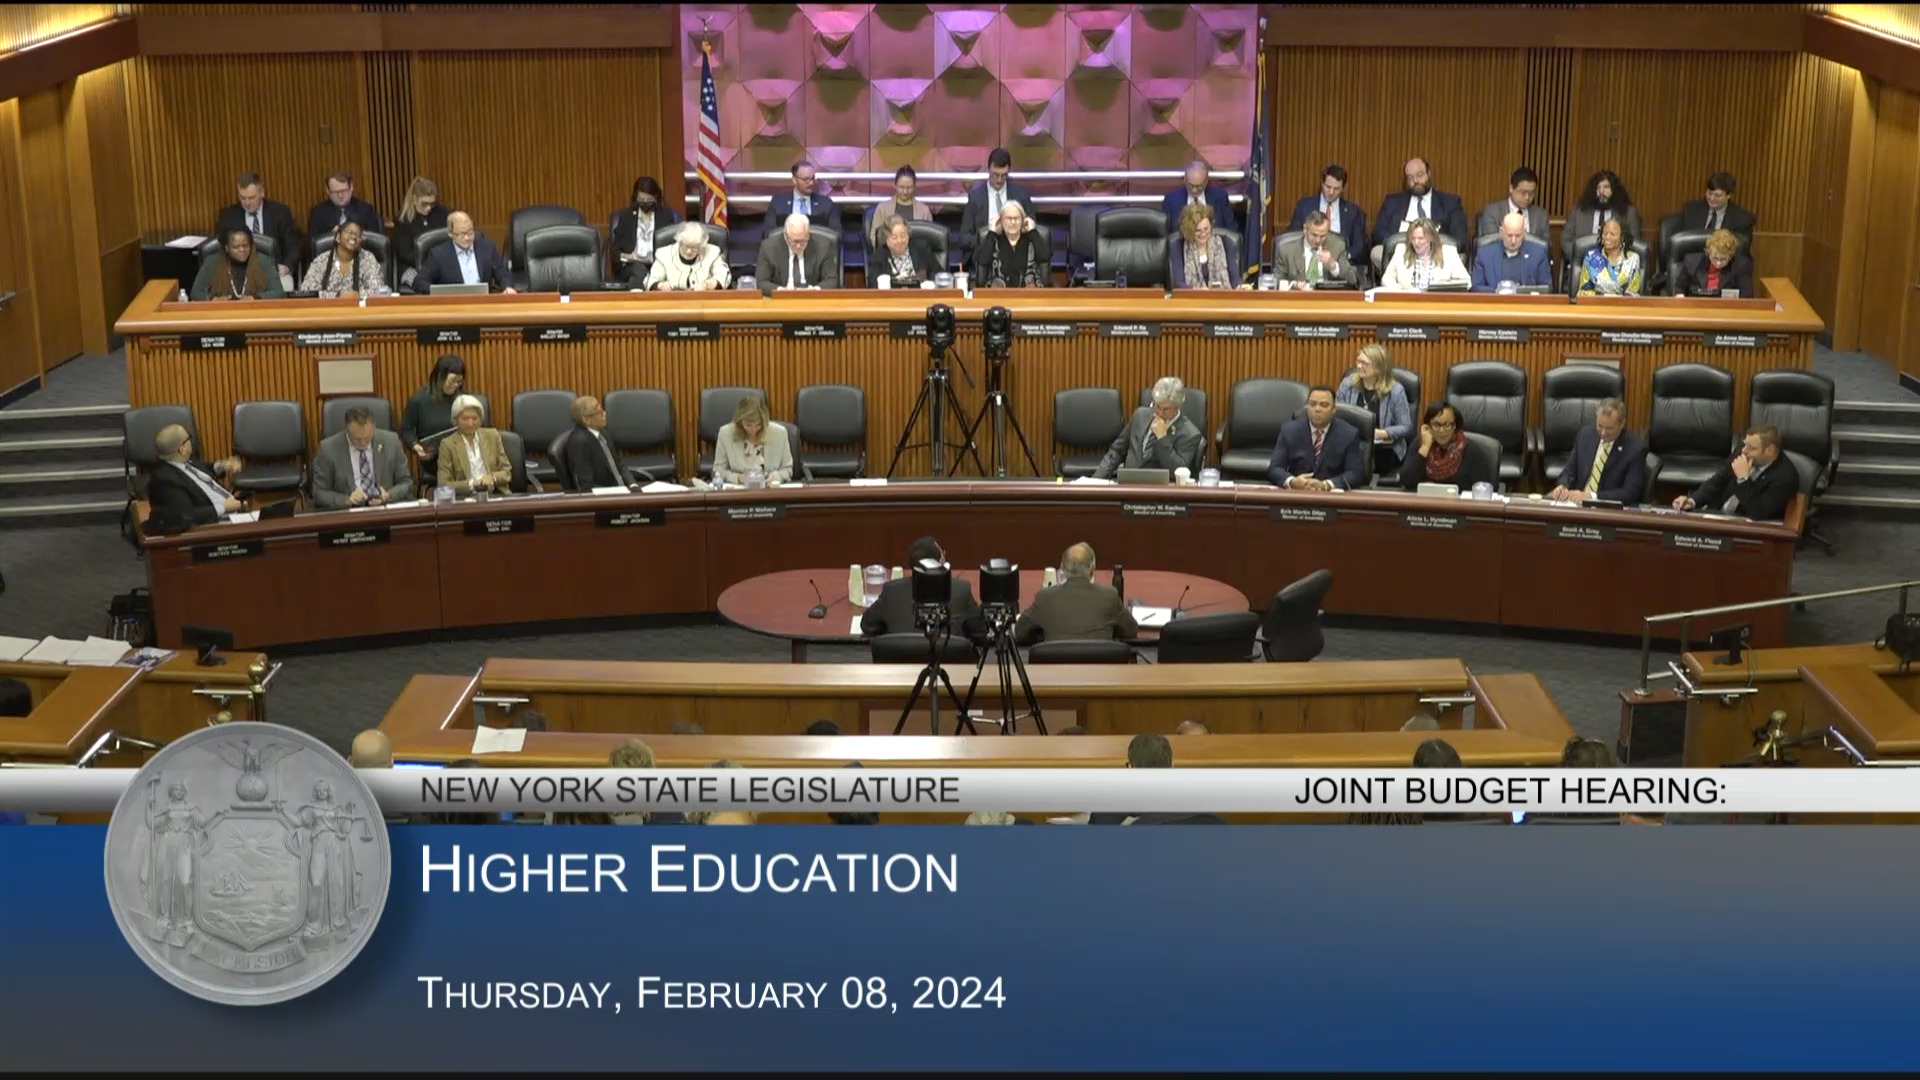 SUNY Chancellor Testifies During Budget Hearing on Higher Education